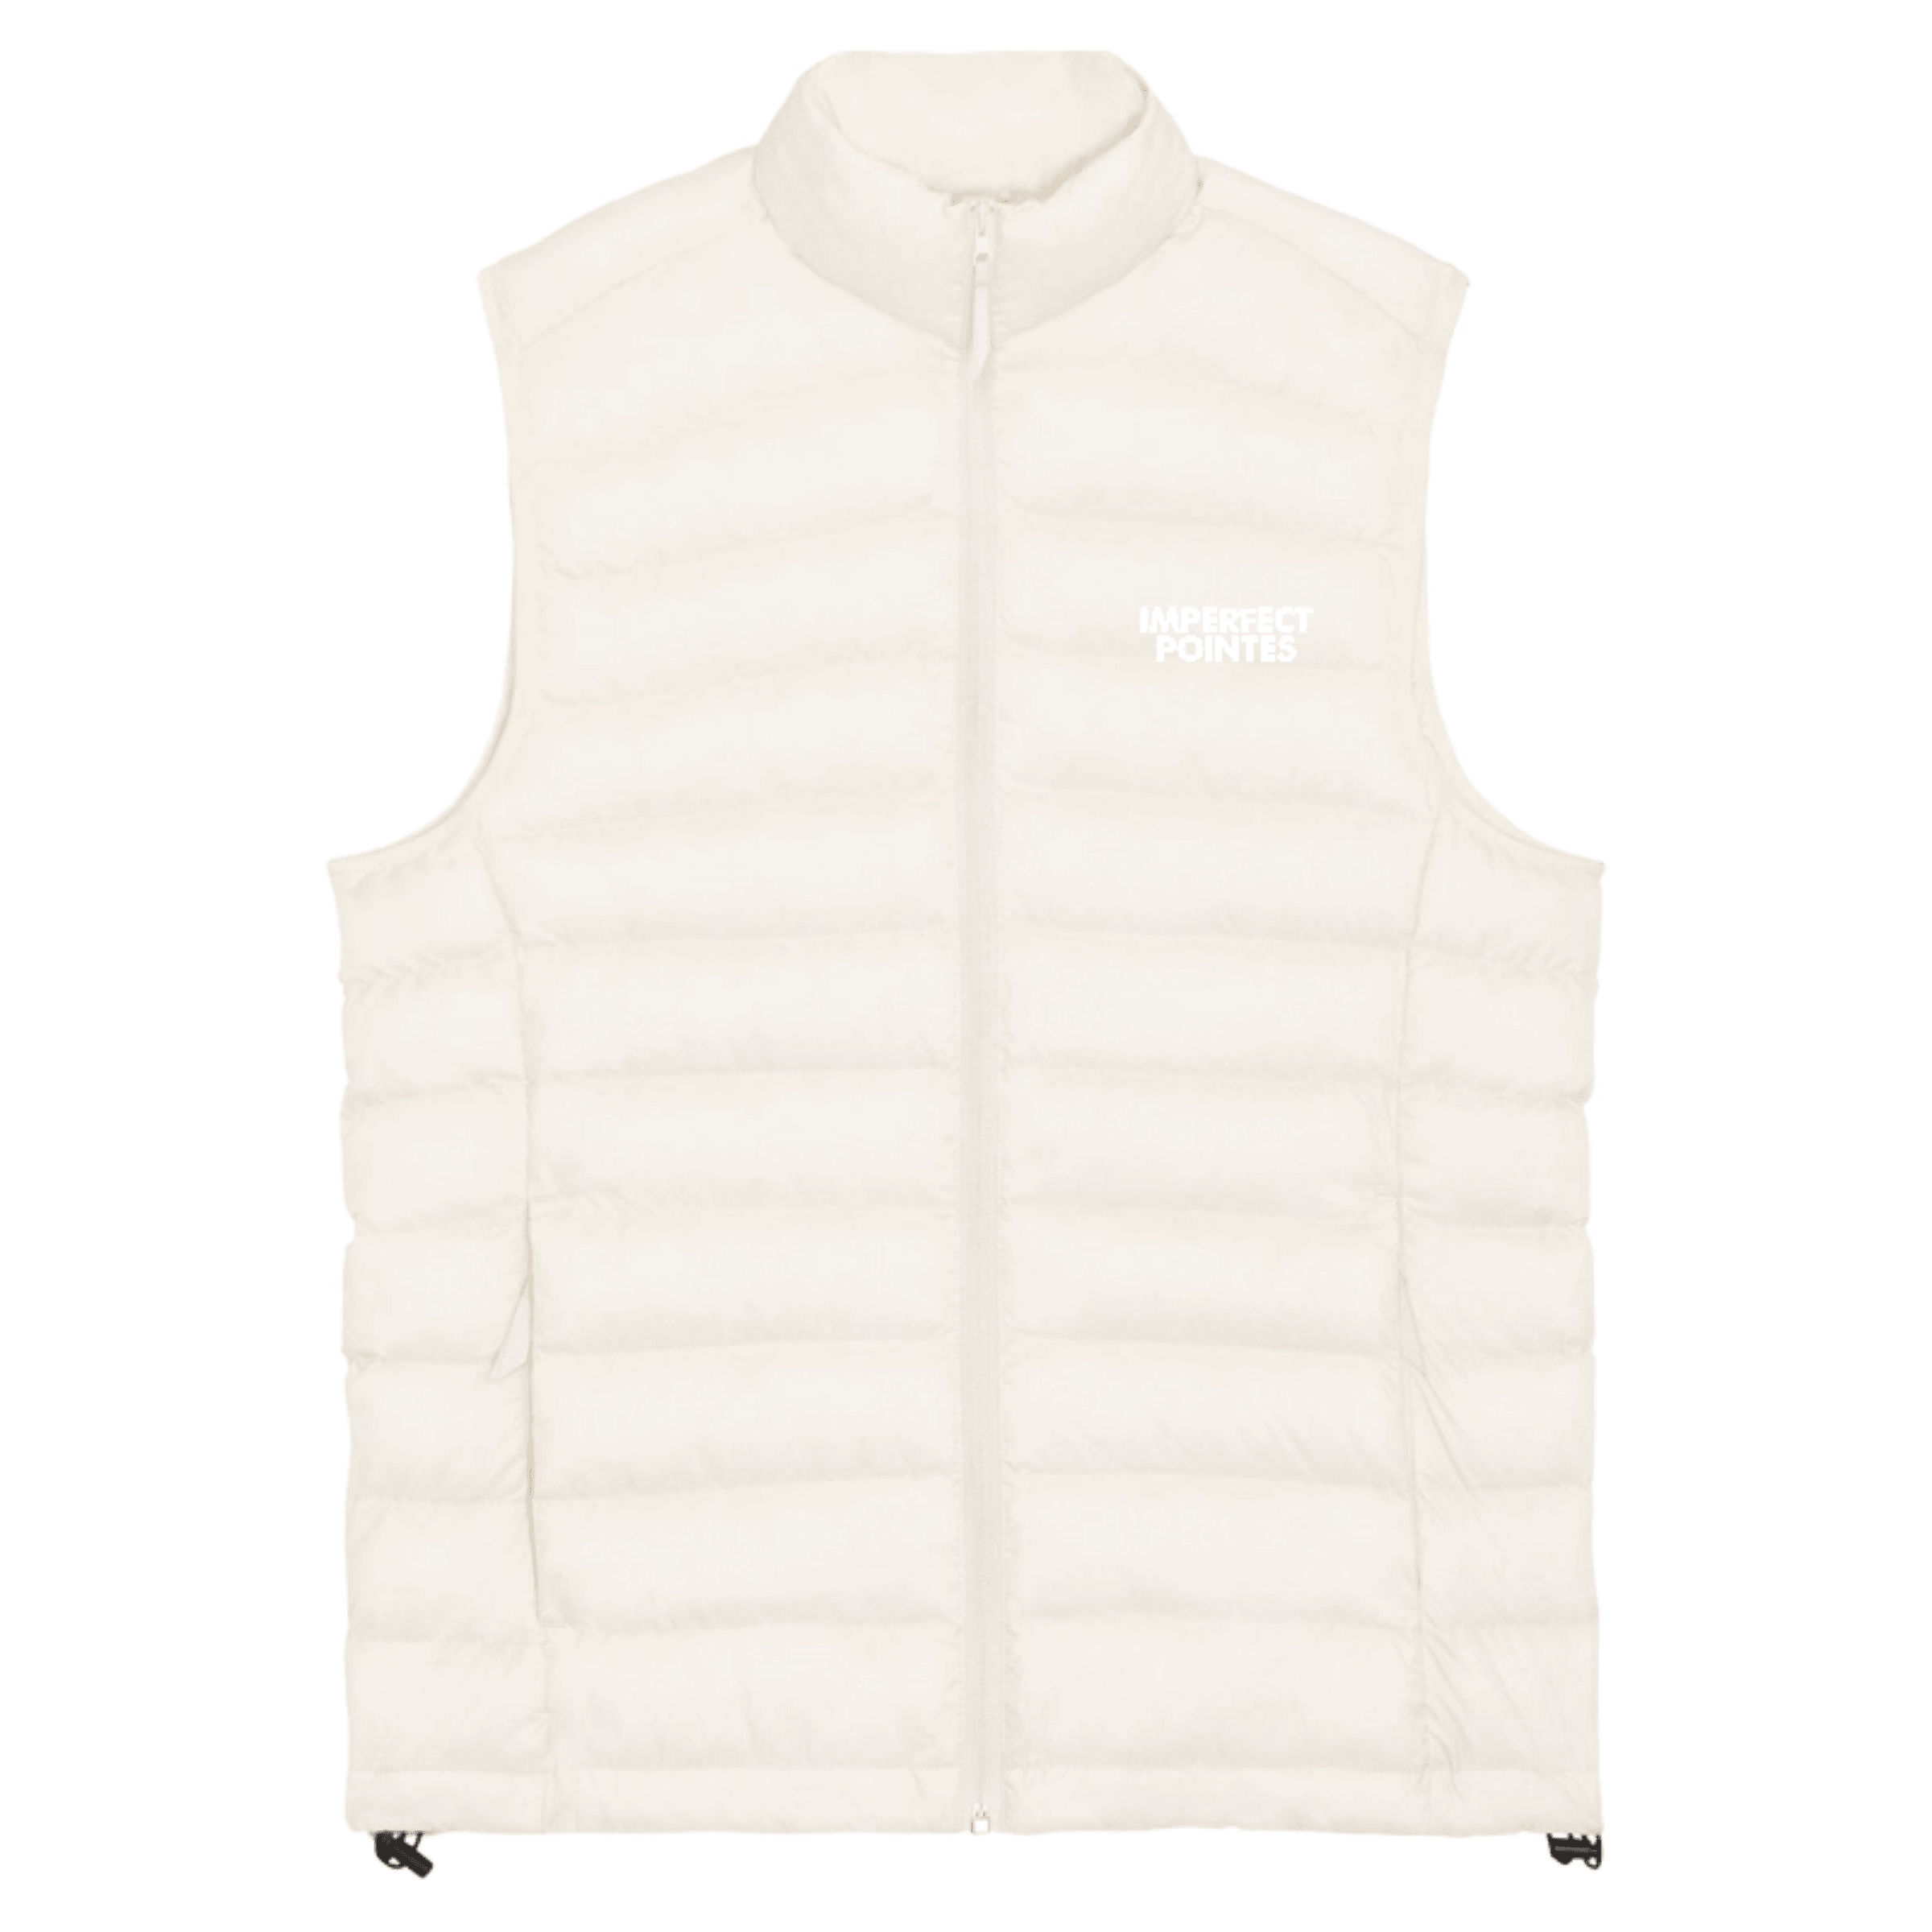 Womens Quilted Bodywarmer Gilet with WHITE Embroidered Logo - Accessories, New, Ready to Ship - Imperfect Pointes